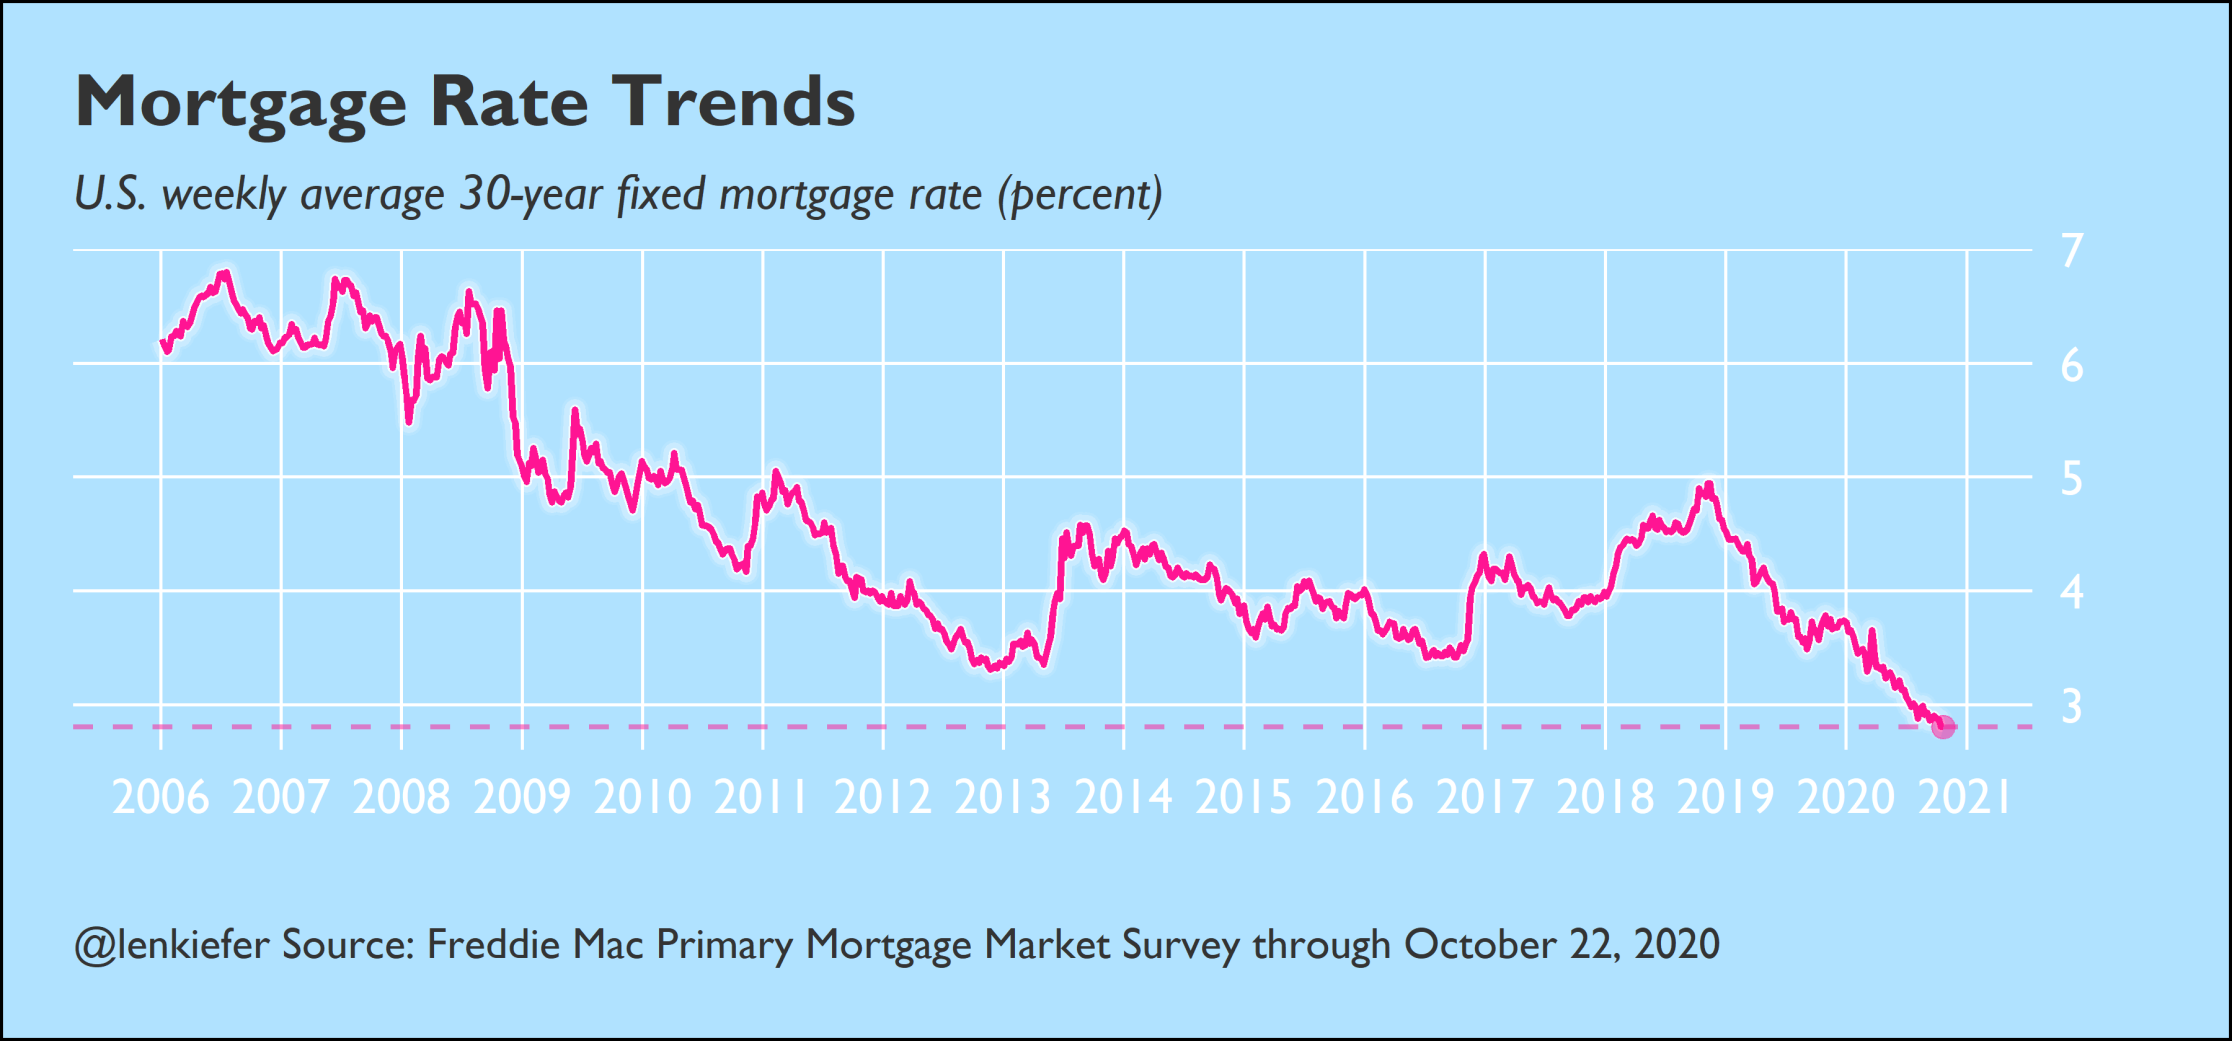 Time series chart of US weekly average 30-year fixed mortgage rates